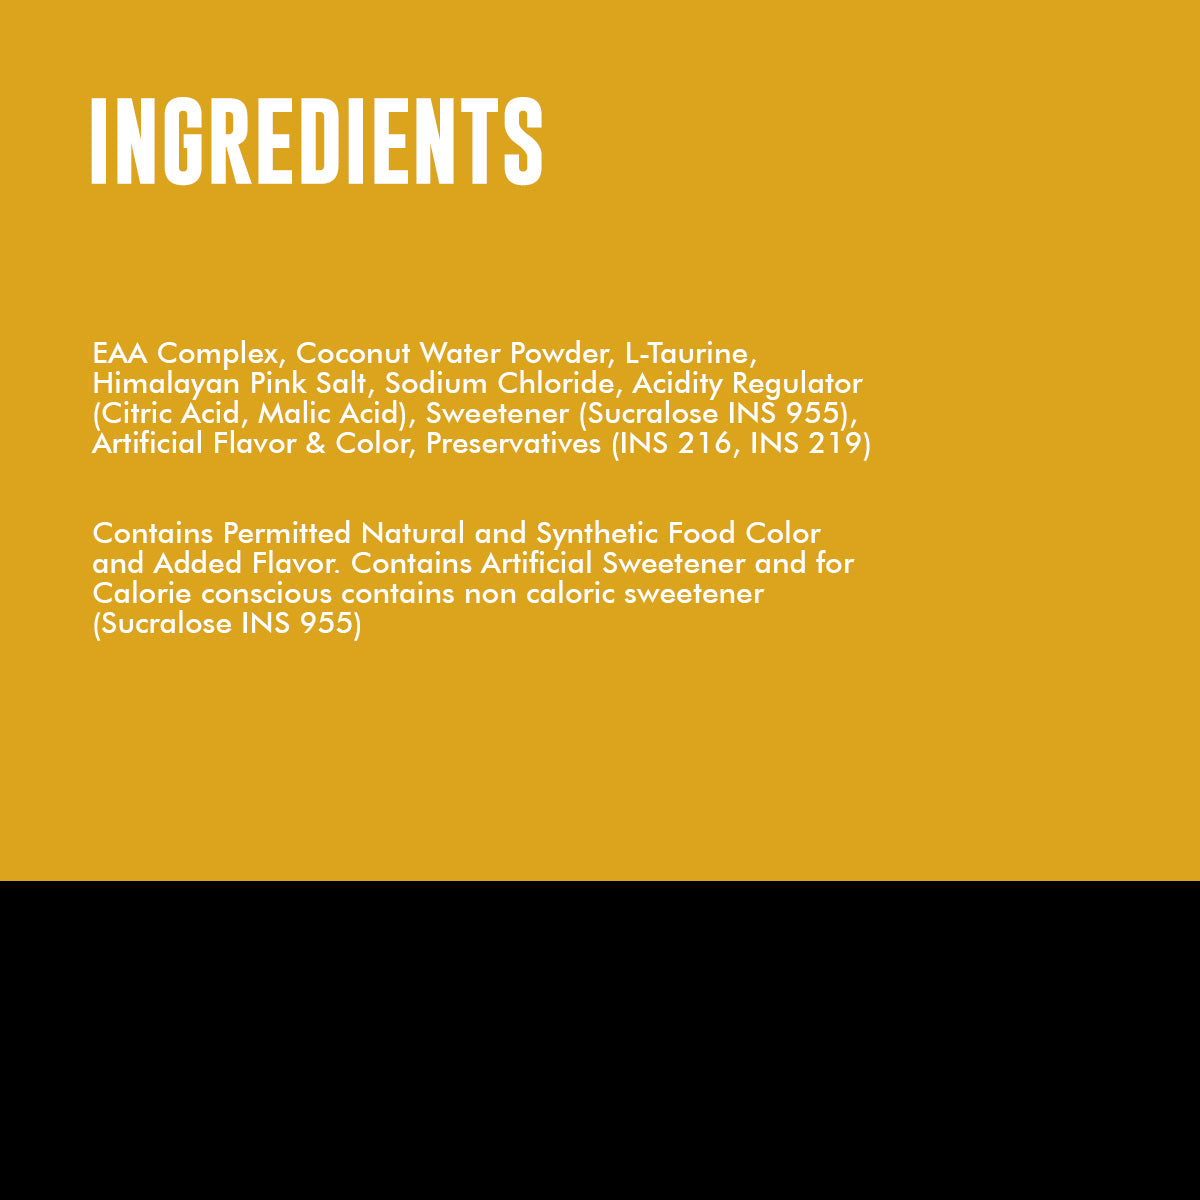 Ingredients of Ripped EAA